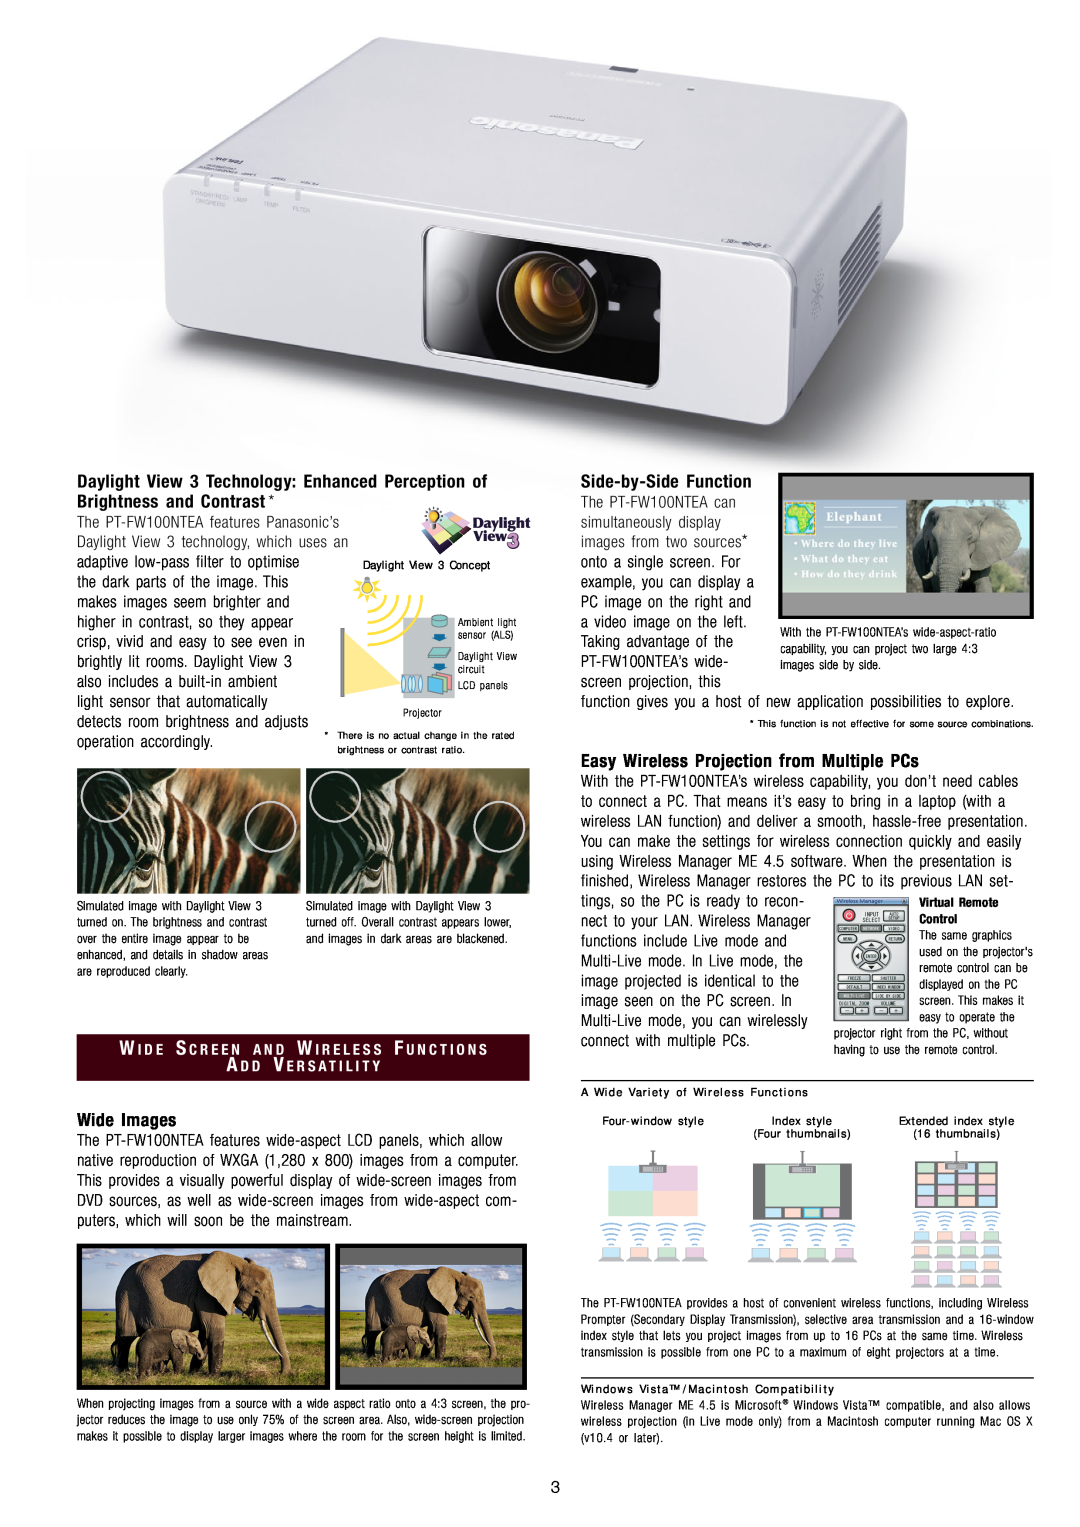 Panasonic PT-FW100NTEA manual Wide Images, Easy Wireless Projection from Multiple PCs 